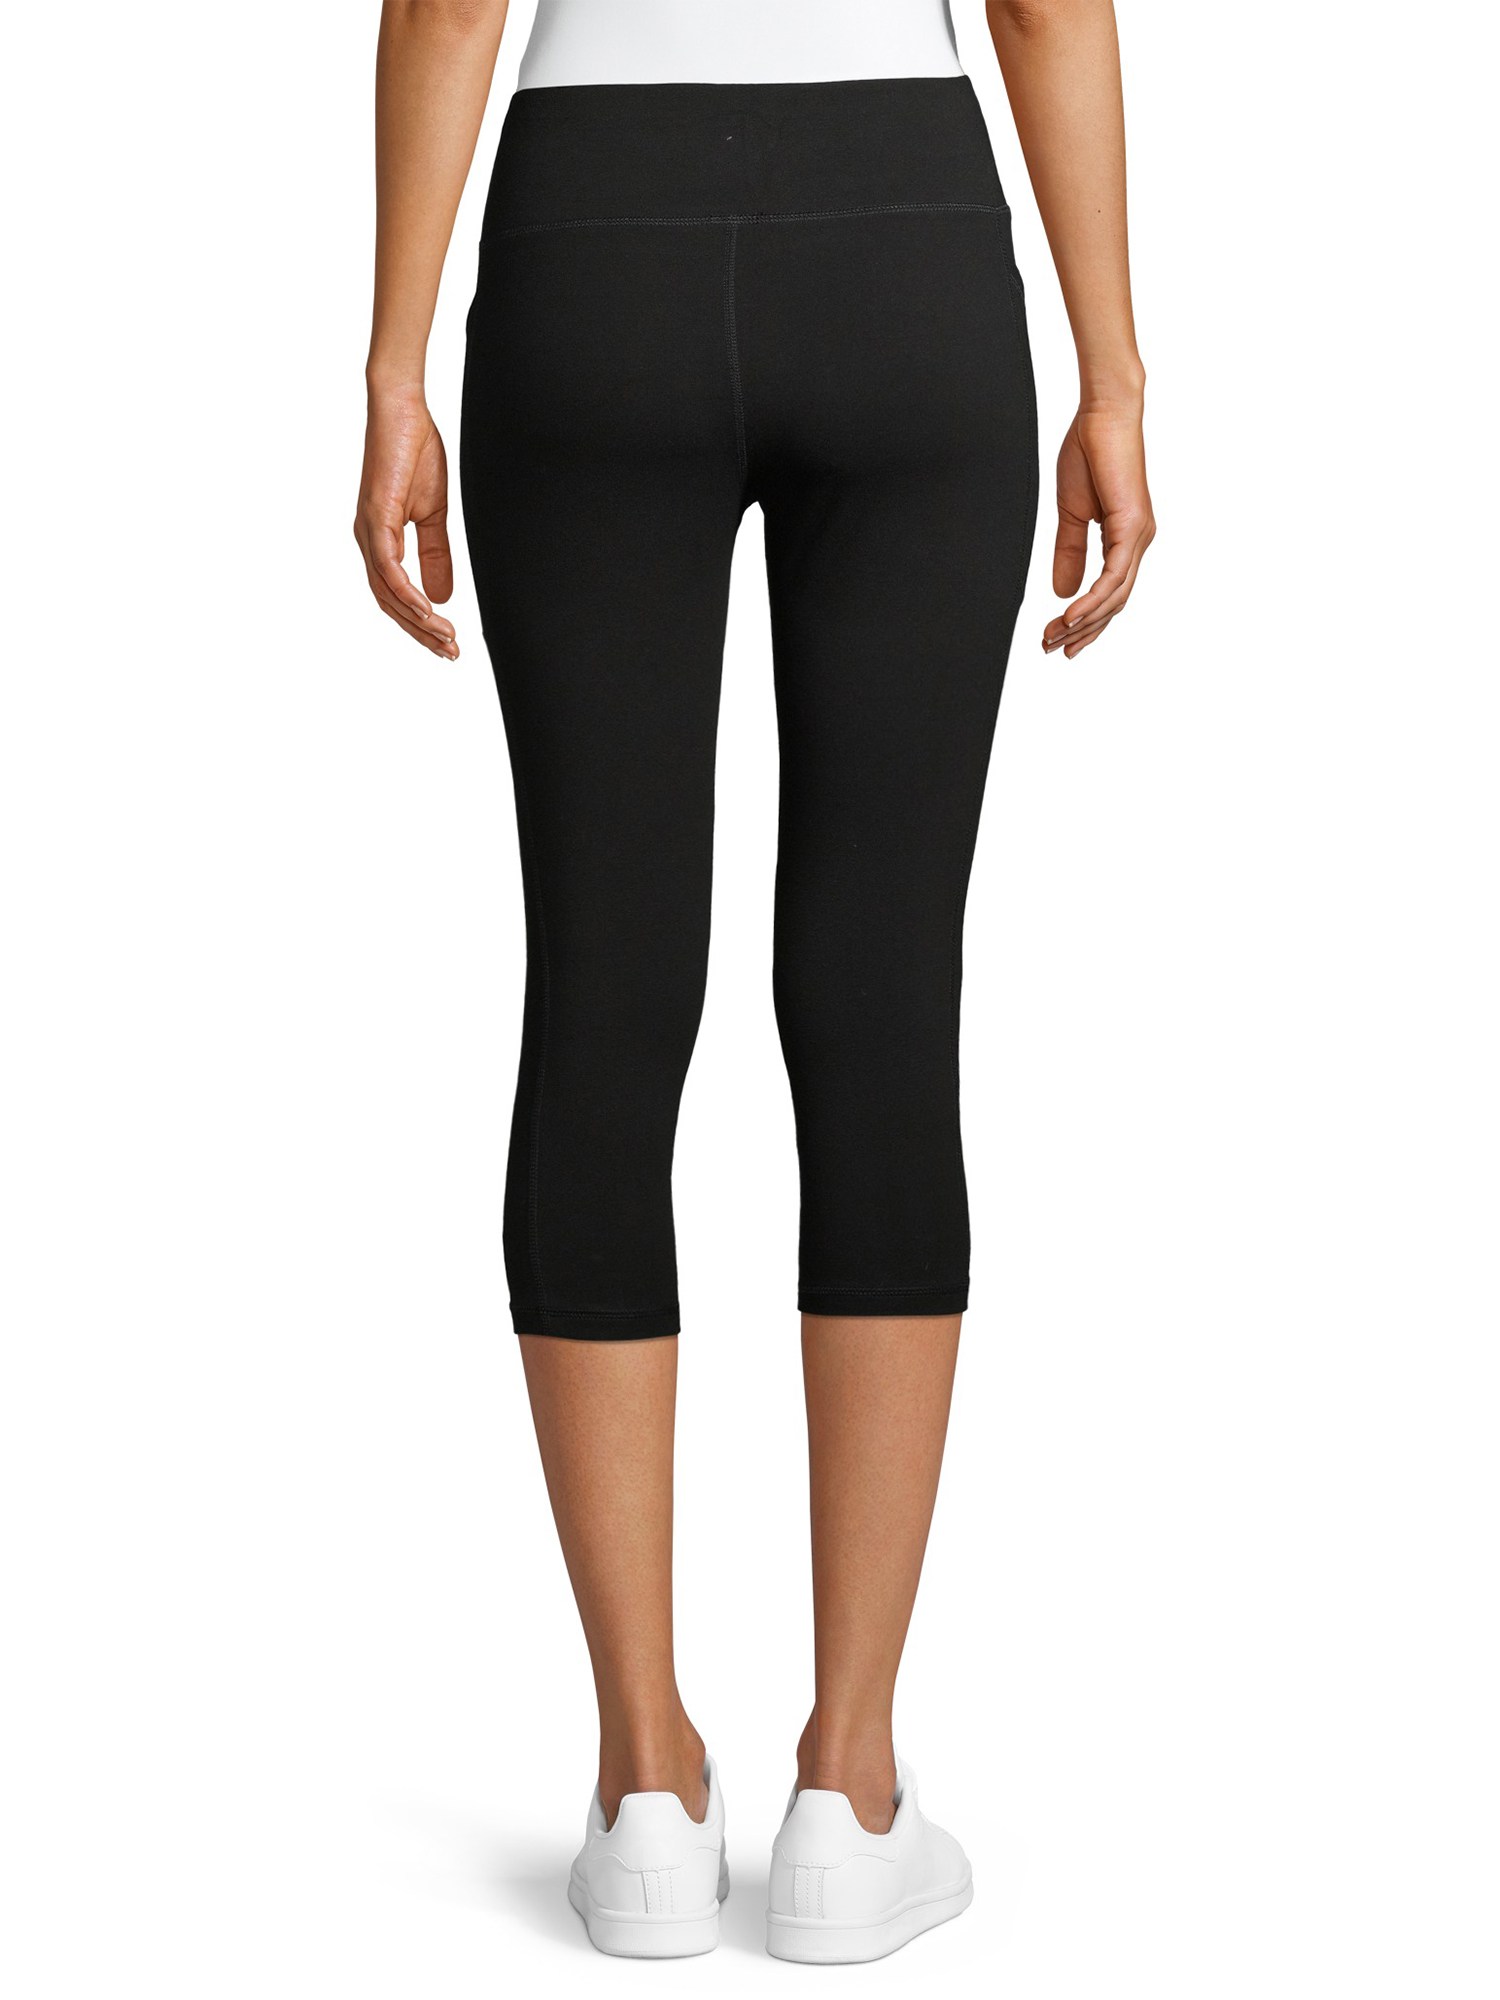 Athletic Works Women's Capris with Side Pockets - image 3 of 6